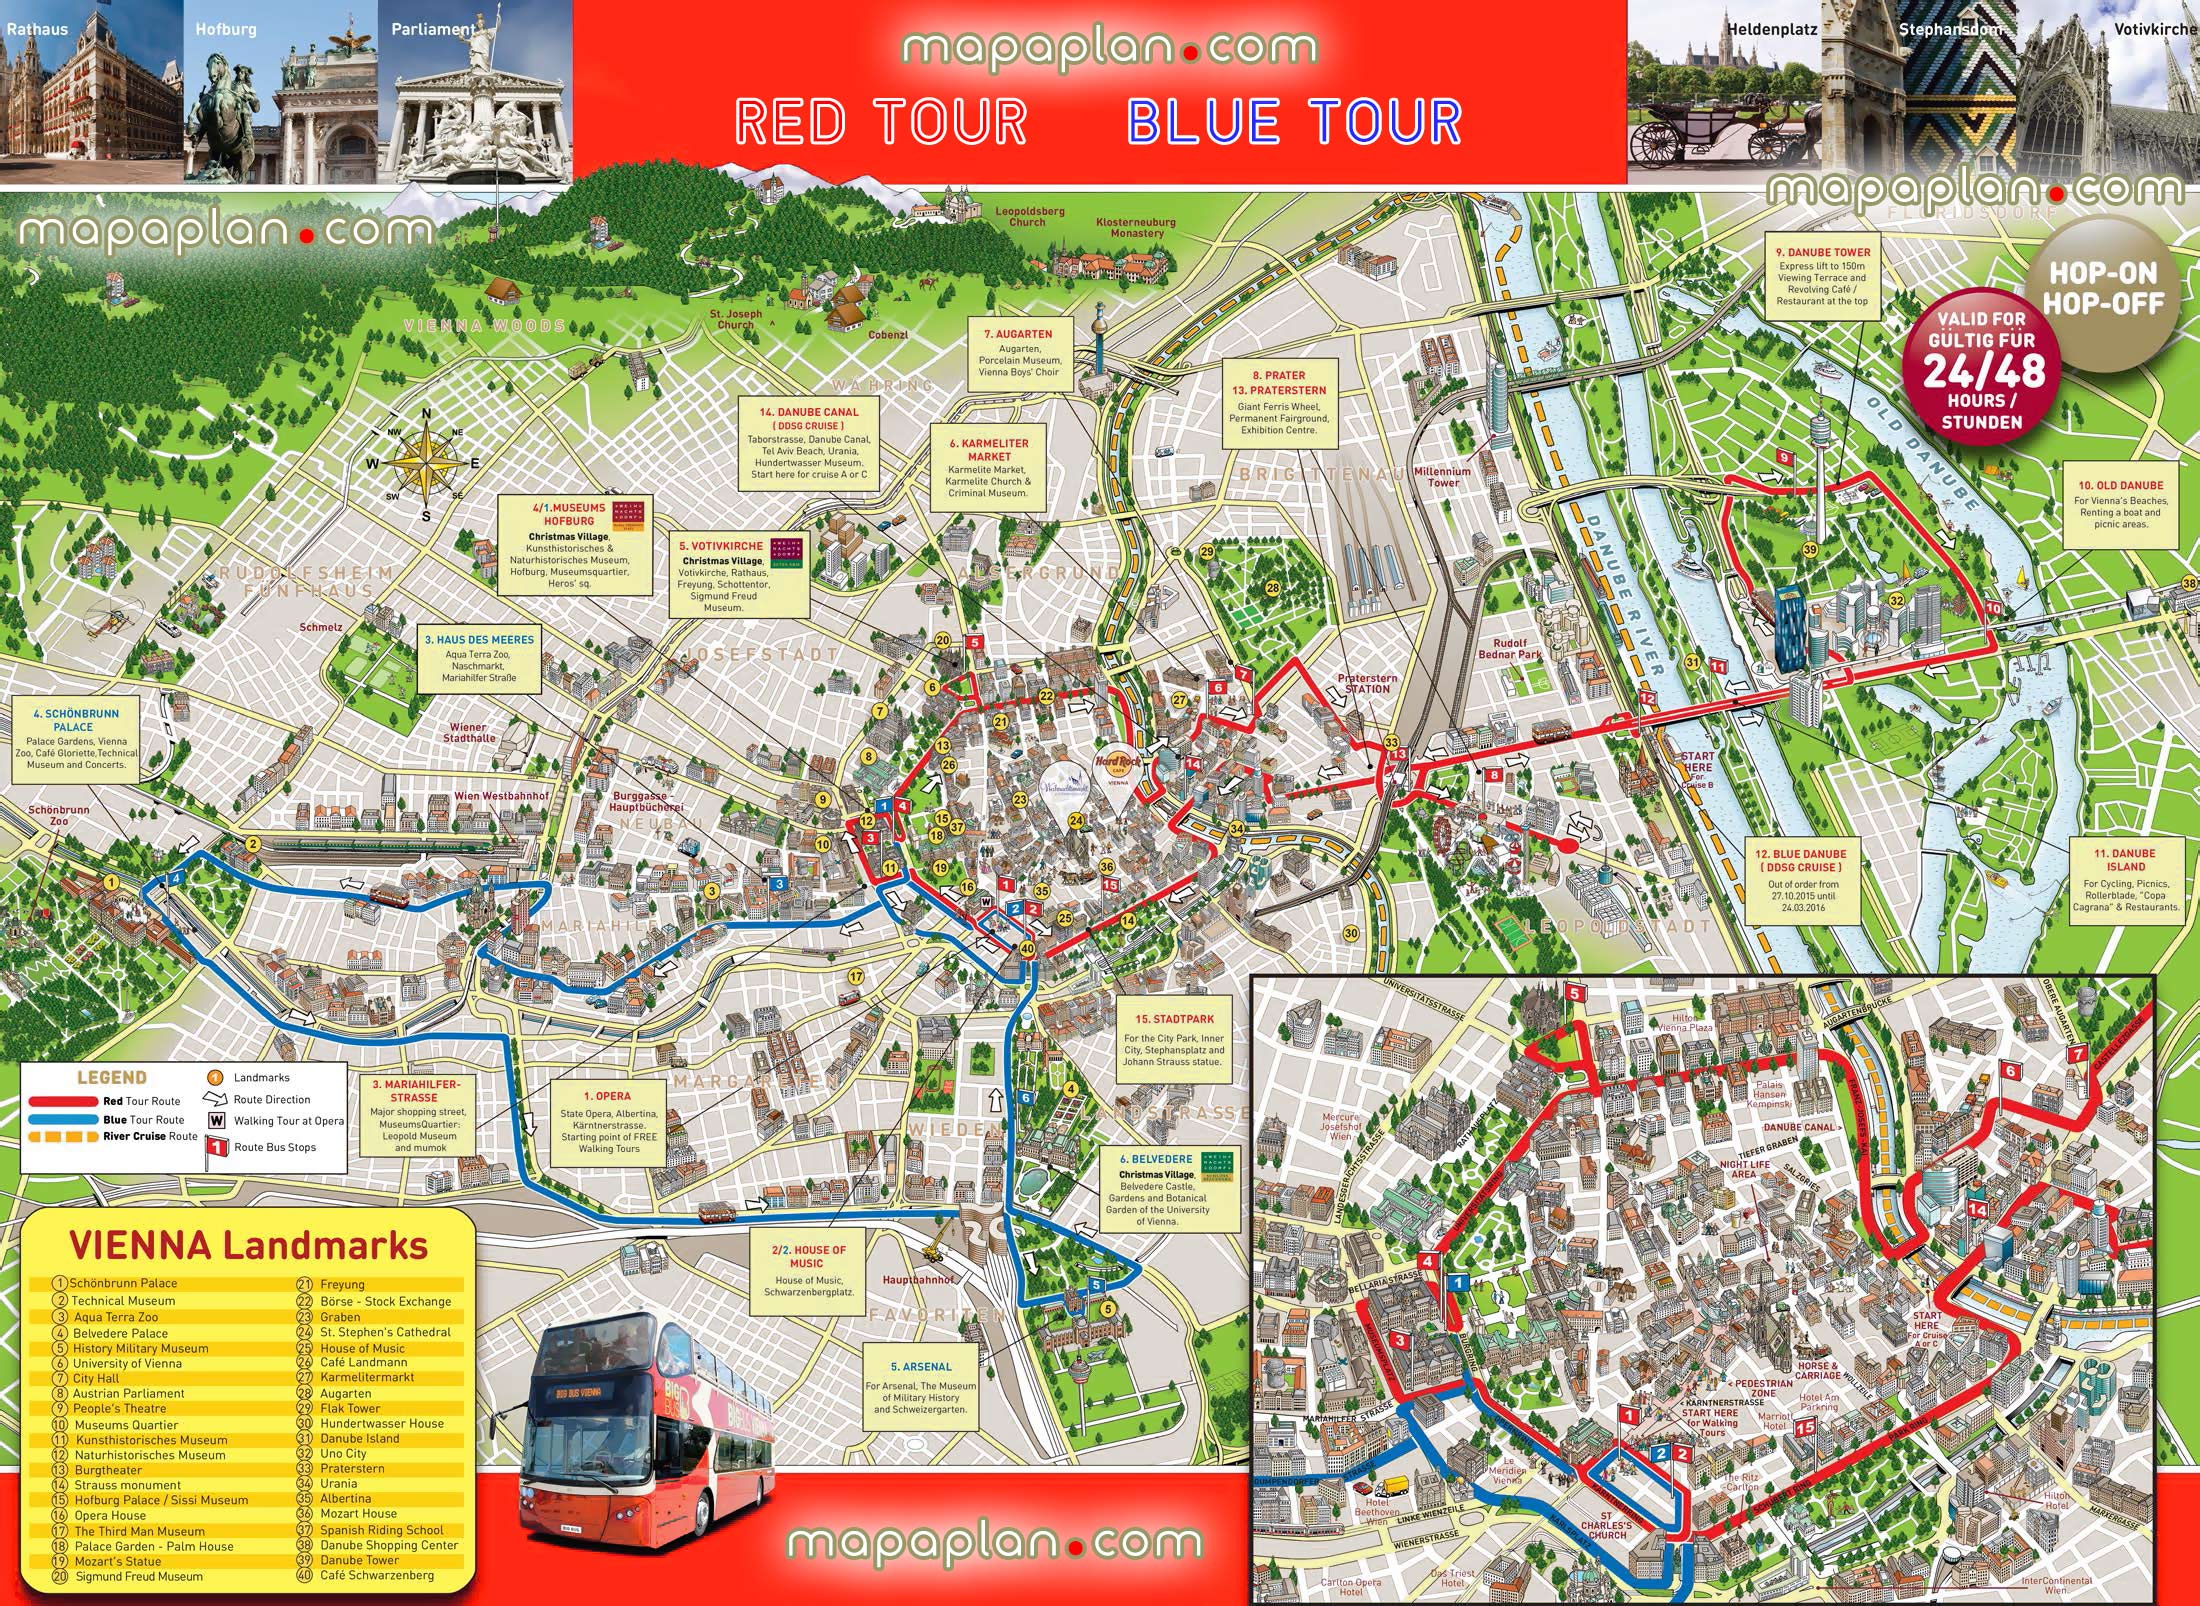 hop hop off bus Vienna sightseeing tour double decker open top red couch visitors plan tour routes birds eye graphical overview big bus city sightseeing trip highlights travel sites landmarkss Vienna Top tourist attractions map